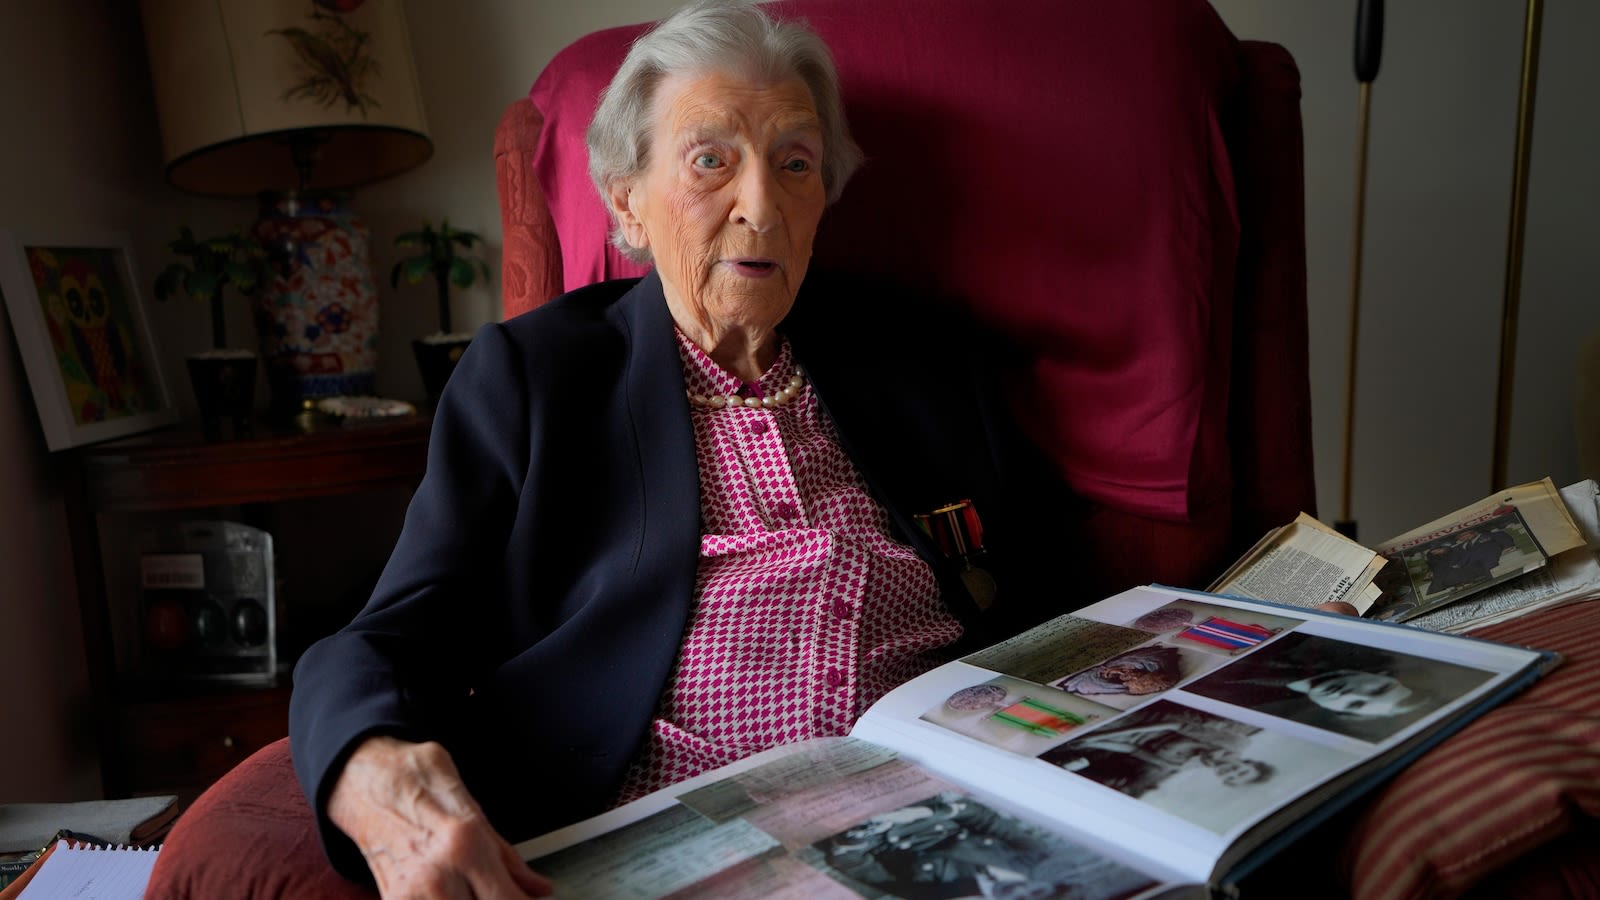 Women were barred from combat during WWII. But they helped ensure the Allies' D-Day success